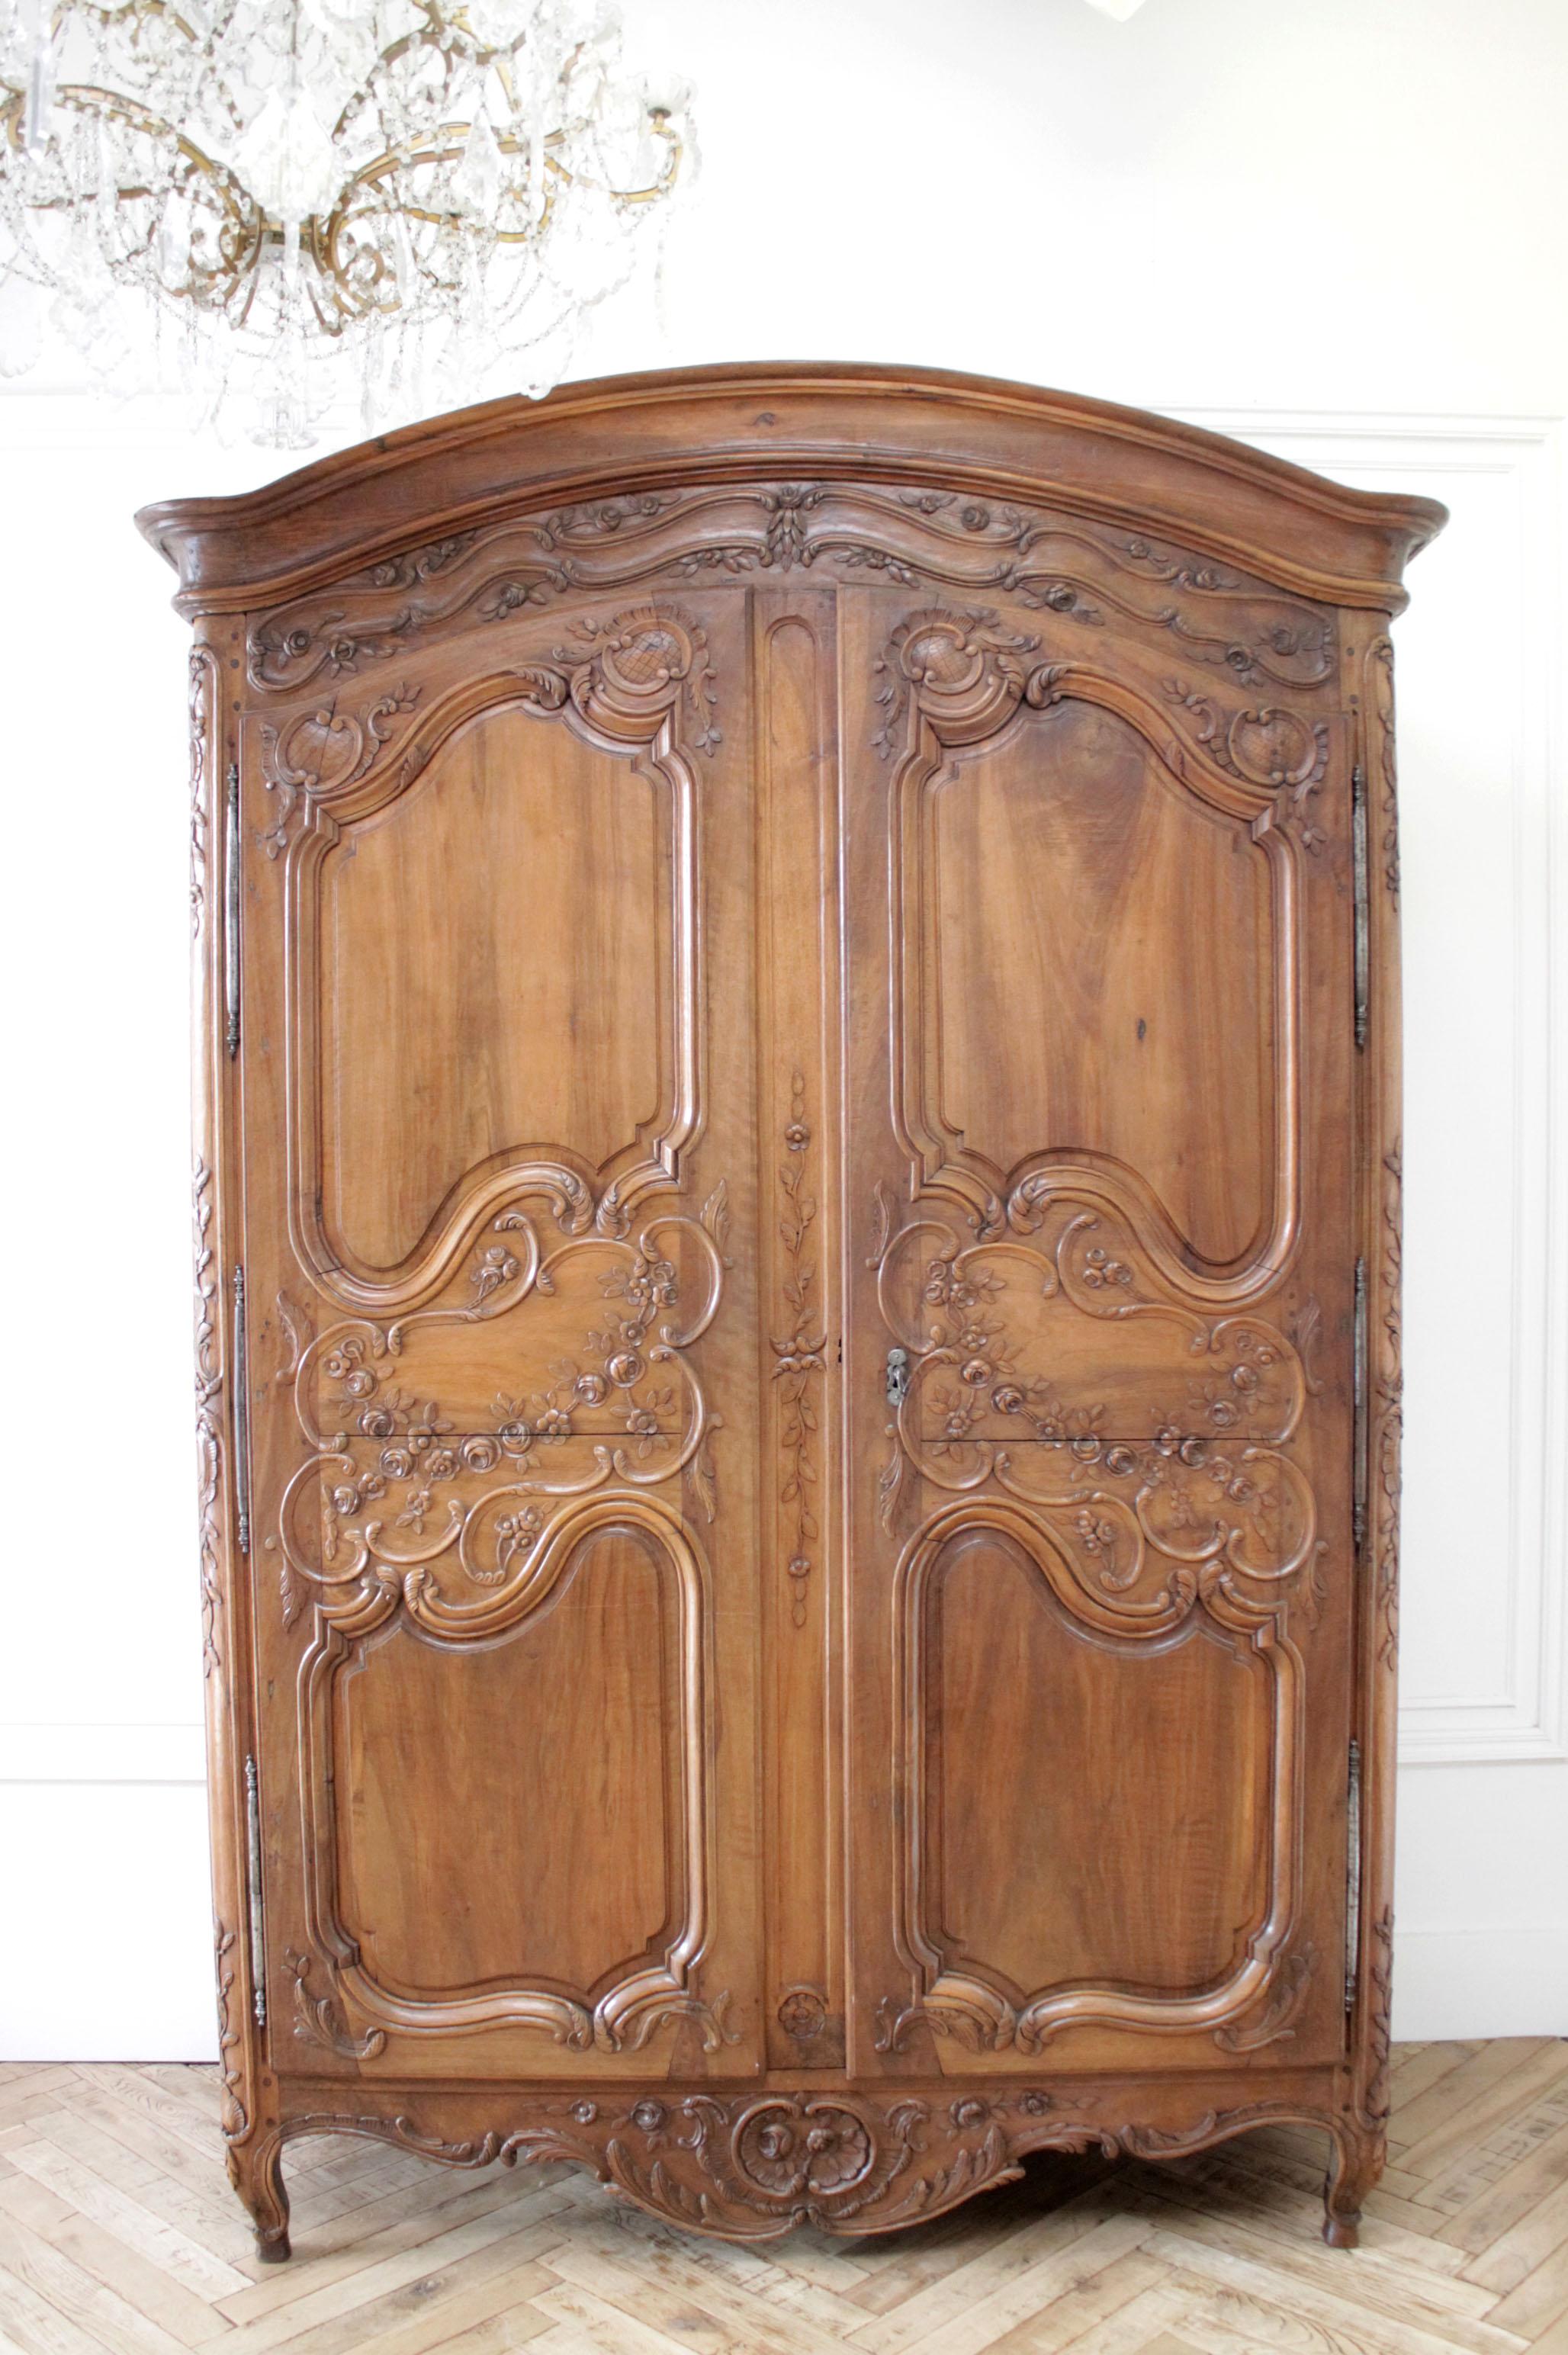 Antique European French provincial carved roses armoire cabinet
Beautiful carved walnut armoire with large carved rose swags on each door. Working locking key, the door needs to be locked to keep closed.
Crown and the doors are the only parts that